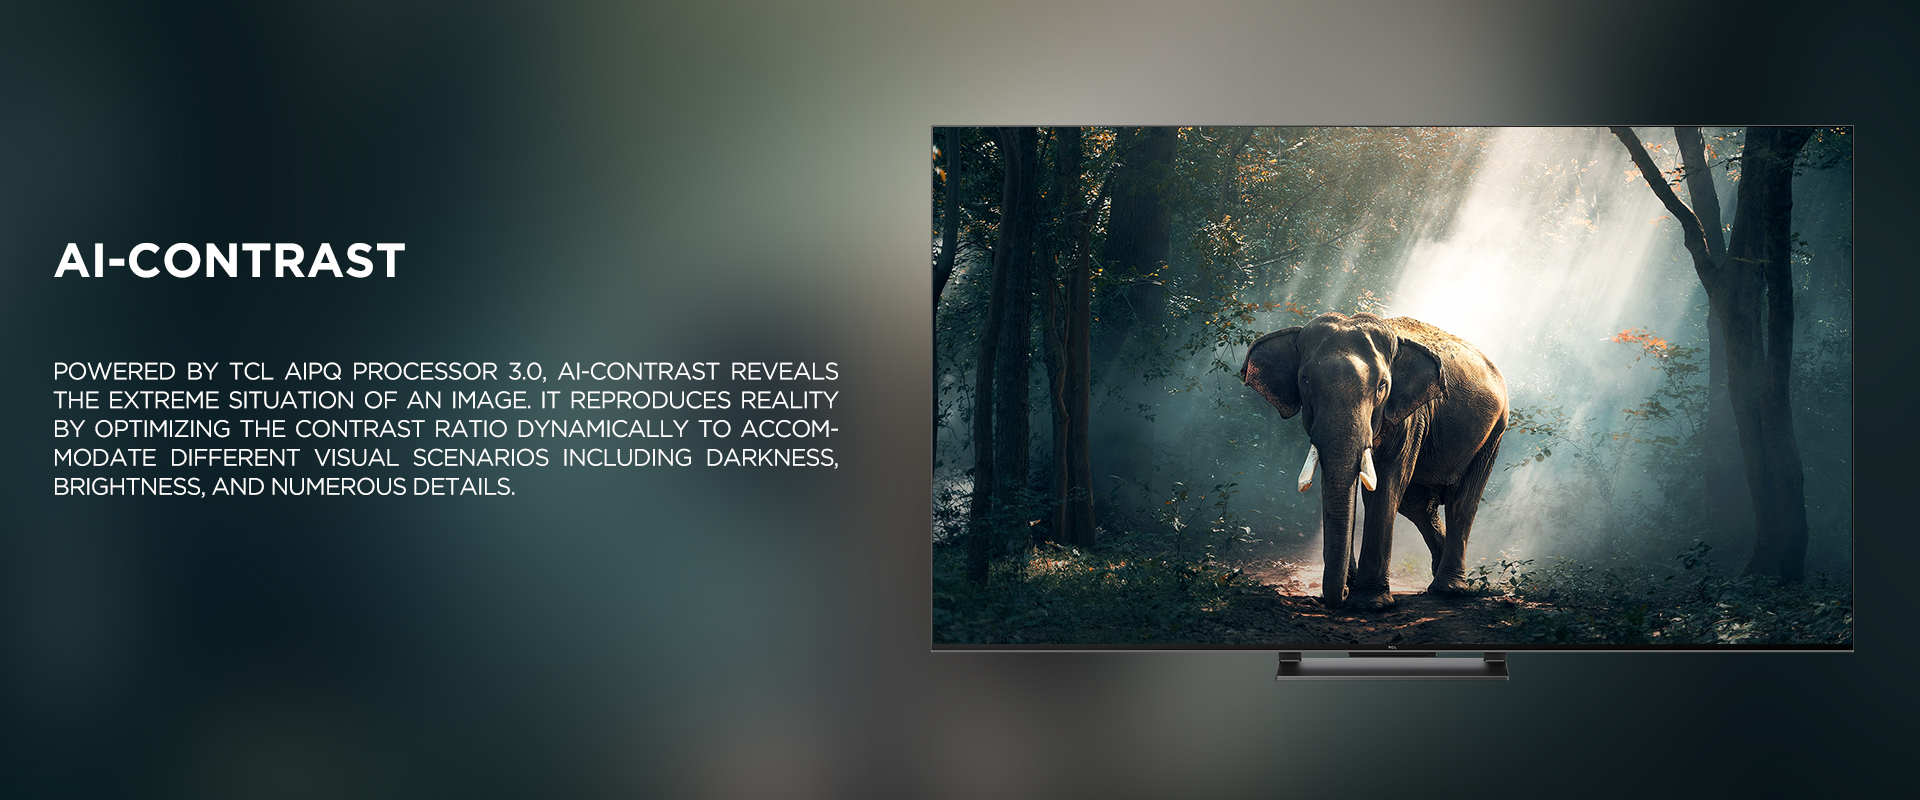 Ai-CONTRAST - Powered by TCL AiPQ Processor 3.0, Ai-Contrast reveals the extreme situation of an image. It reproduces reality by optimizing the contrast ratio dynamically to accommodate different visual scenarios including darkness, brightness, and numerous details.
